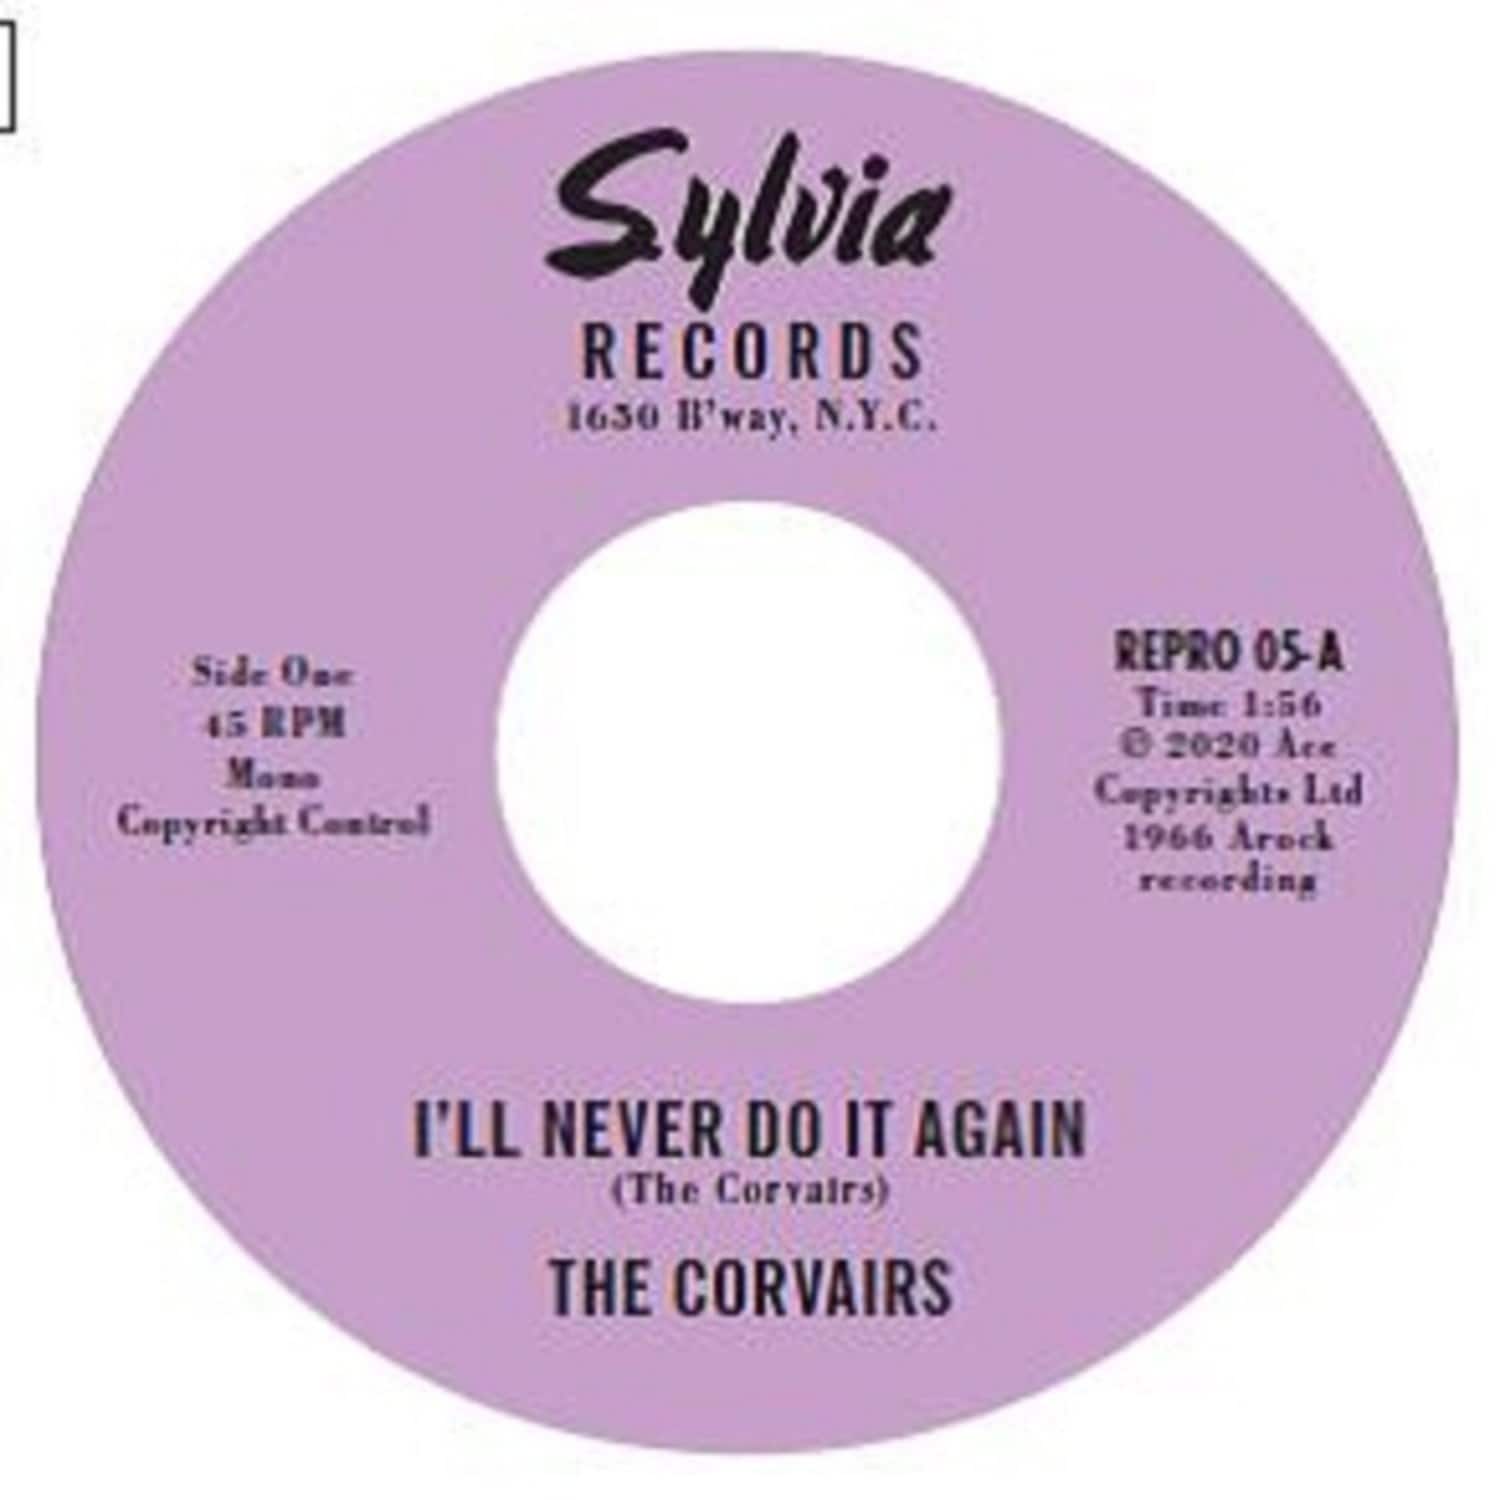 The Corvairs - I LL NEVER DO IT AGAIN 